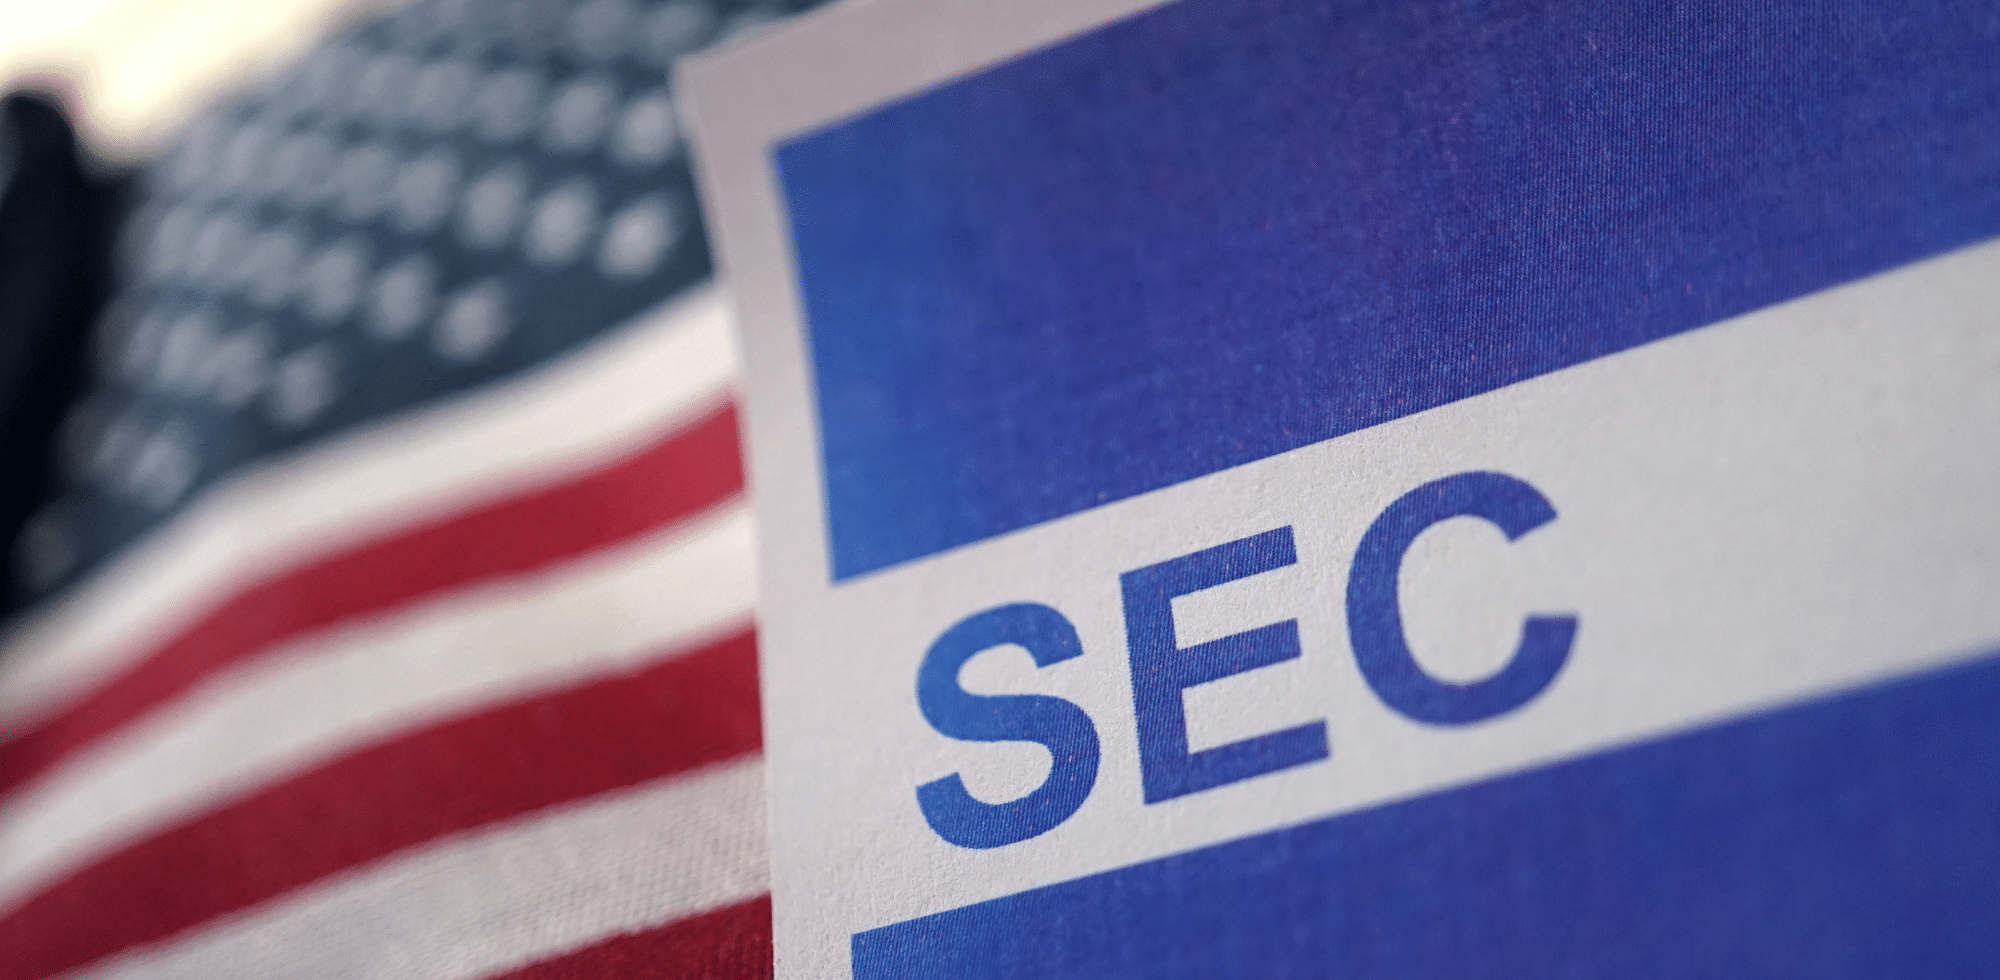 Everything You Need to Know About the Proposed SEC Cybersecurity Reporting Requirements